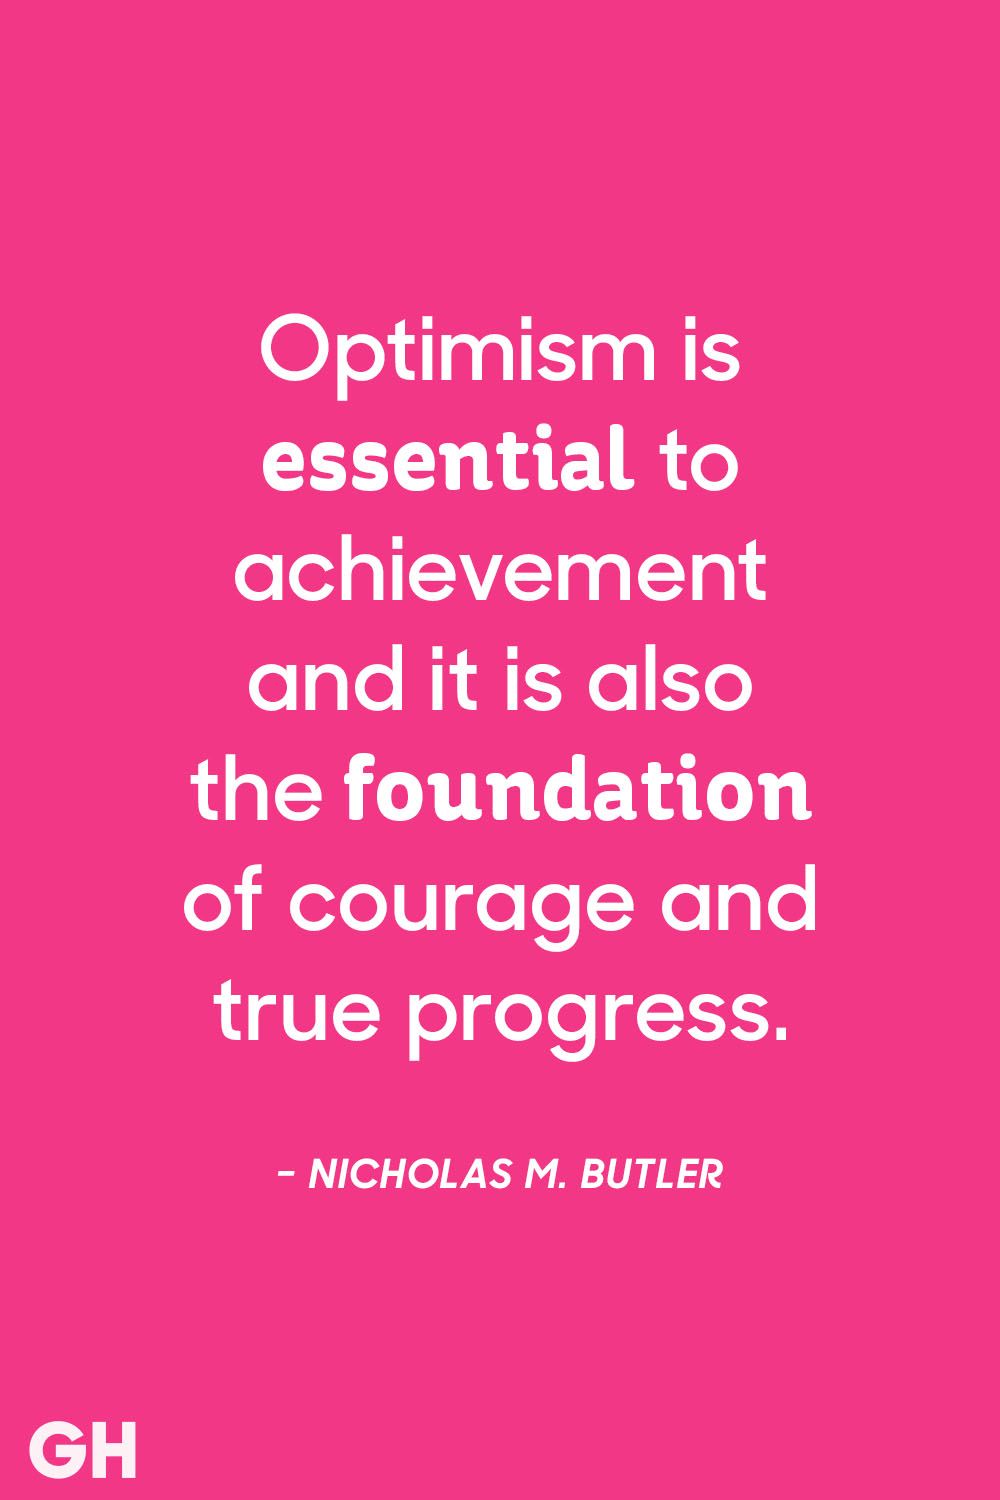 optimism is essential to achievement and it is also the foundation of courage and true progress.